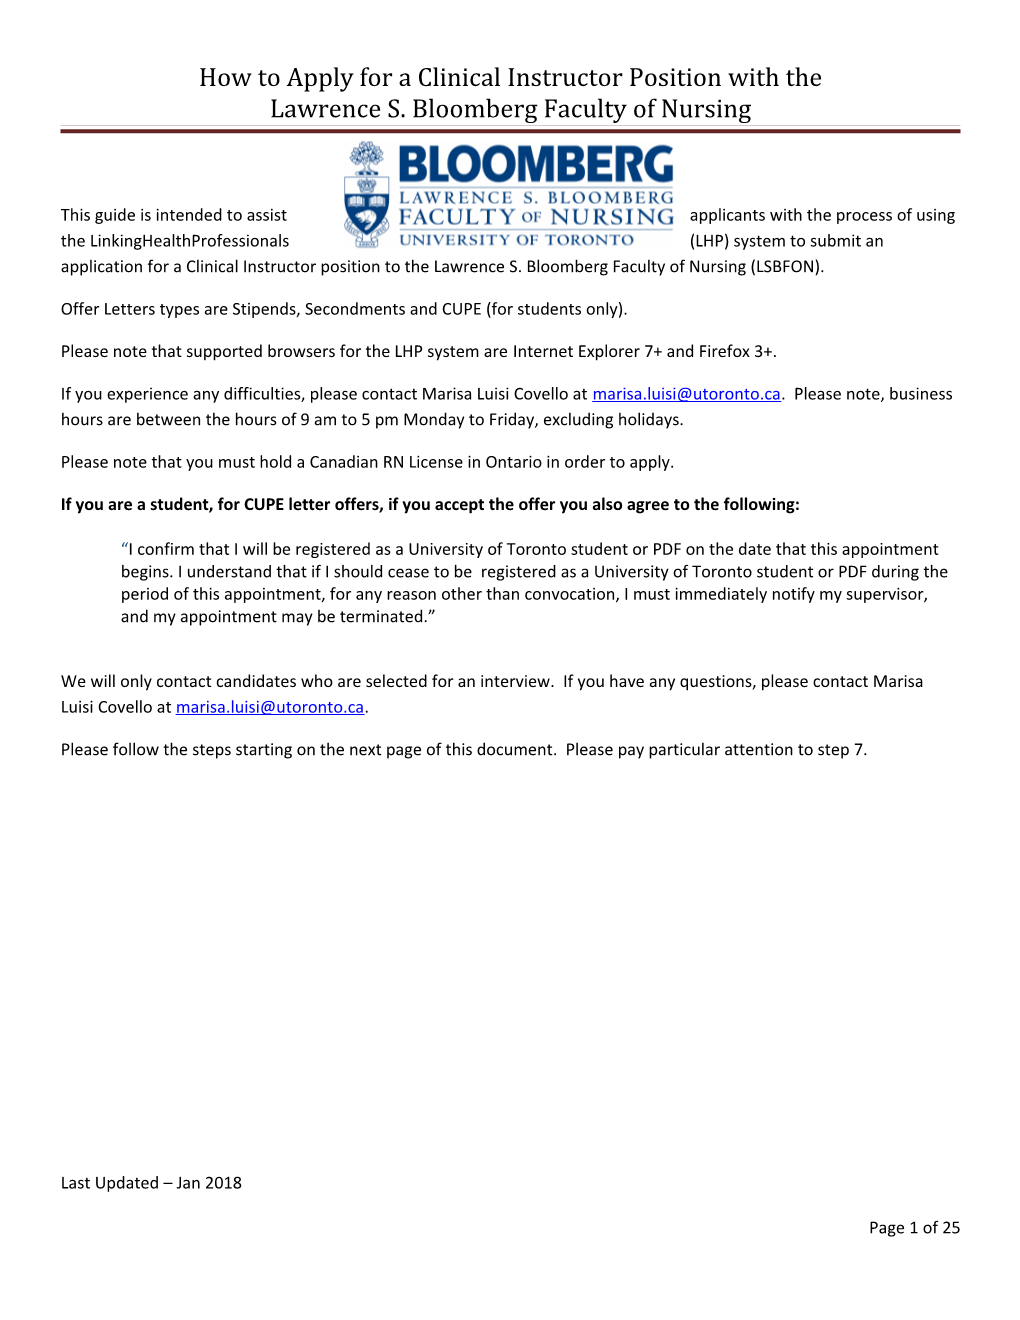 How to Apply for a Clinical Instructor Position with the Lawrence S. Bloomberg Faculty